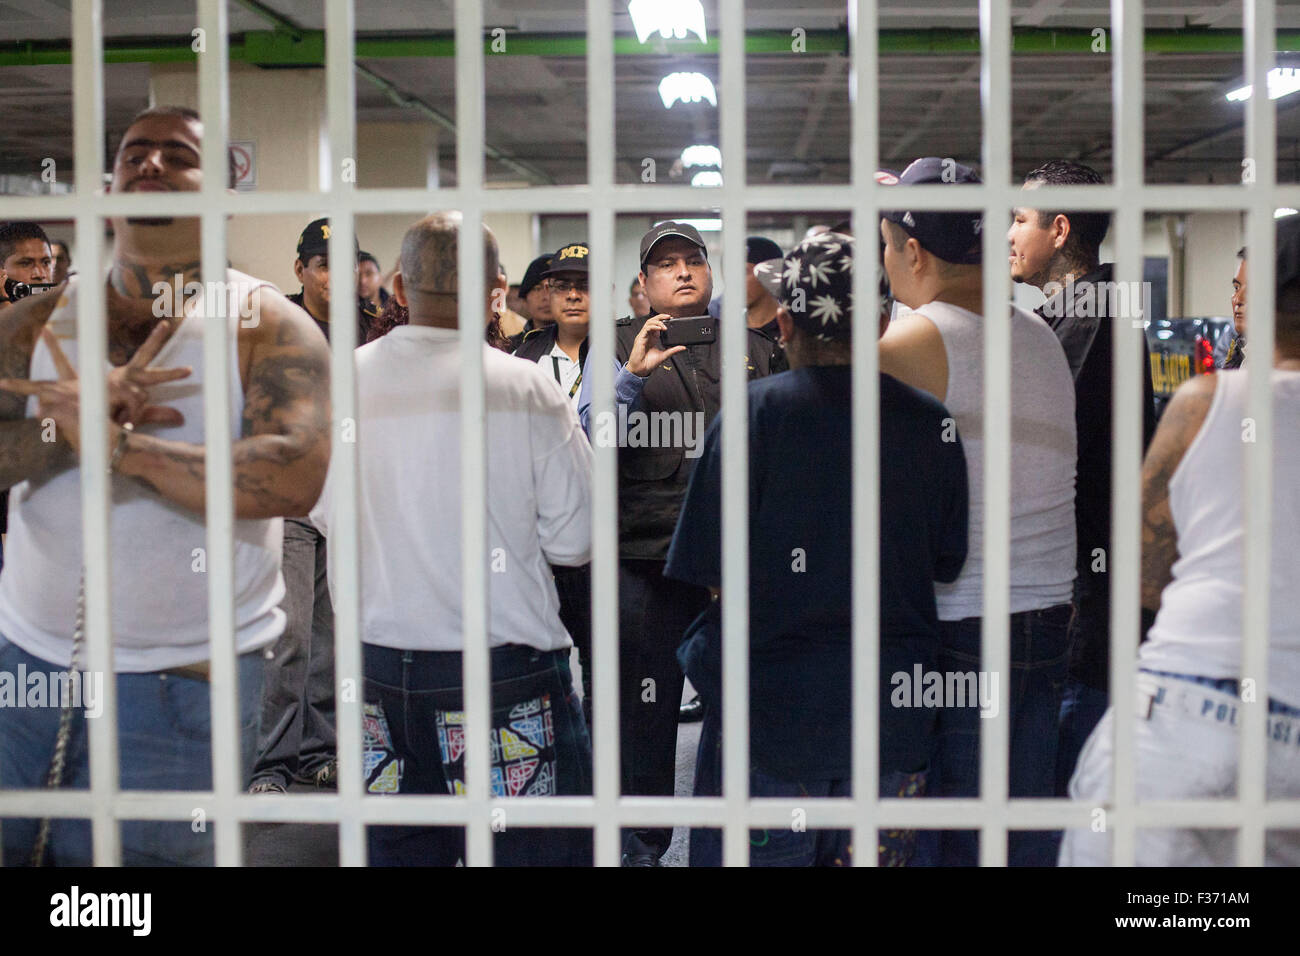 Guatemala City, Guatemala. 30th Sep, 2015. Gangsters keep under custody in the Tower of Courts, in Guatemala City, capital of Guatemala, Sept. 30, 2015. A gang member was killed and two others wounded by rival gangsters of Barrio 18 and Mara Salvatrucha while they were held under custody in the Tower of Courts basement, located in the Civic Center of the Guatemalan capital, according to local press information. Credit:  Luis Echeverria/Xinhua/Alamy Live News Stock Photo